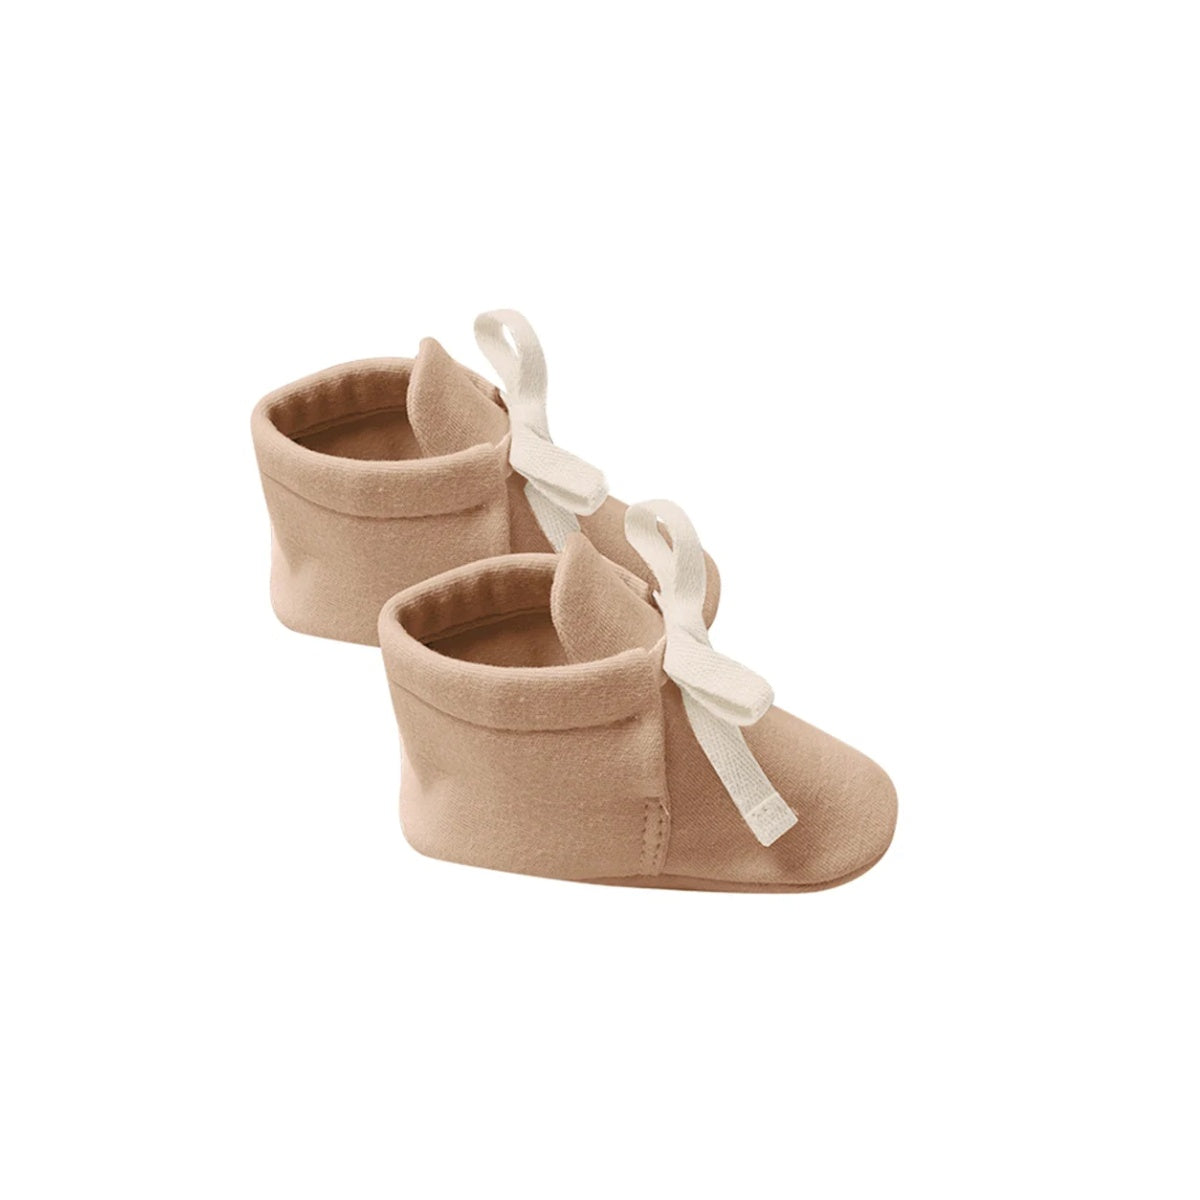 Baby booties - Apricot